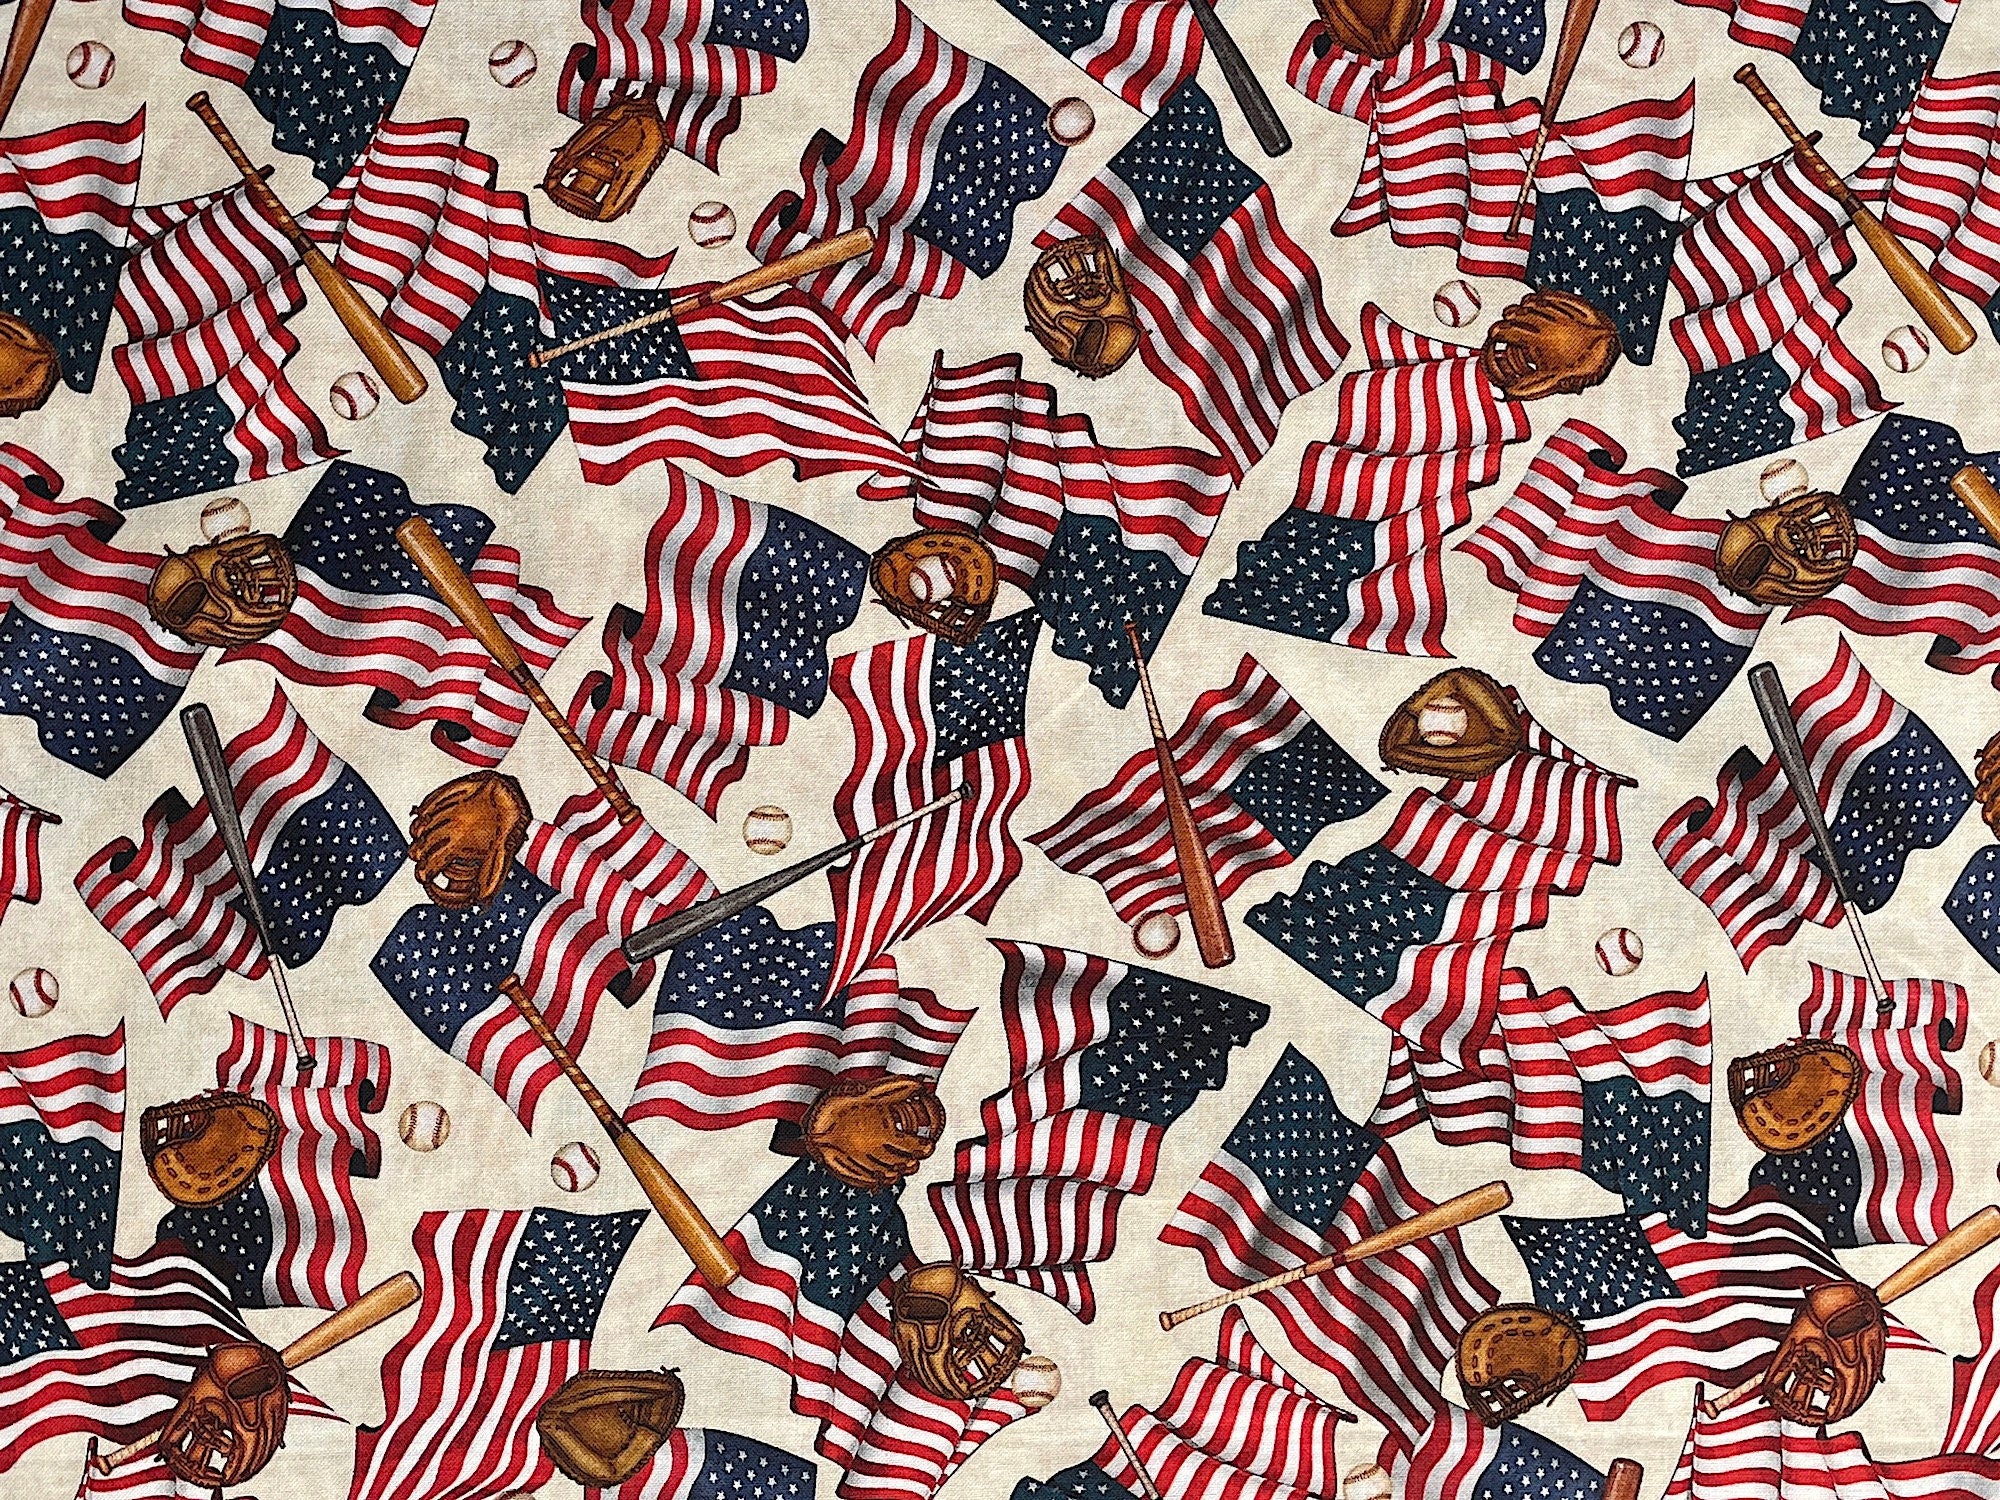 This colorful Red White & Blue design consists of American Flags, Baseballs, Bats and Baseballs & Mitts. The background is an cream.